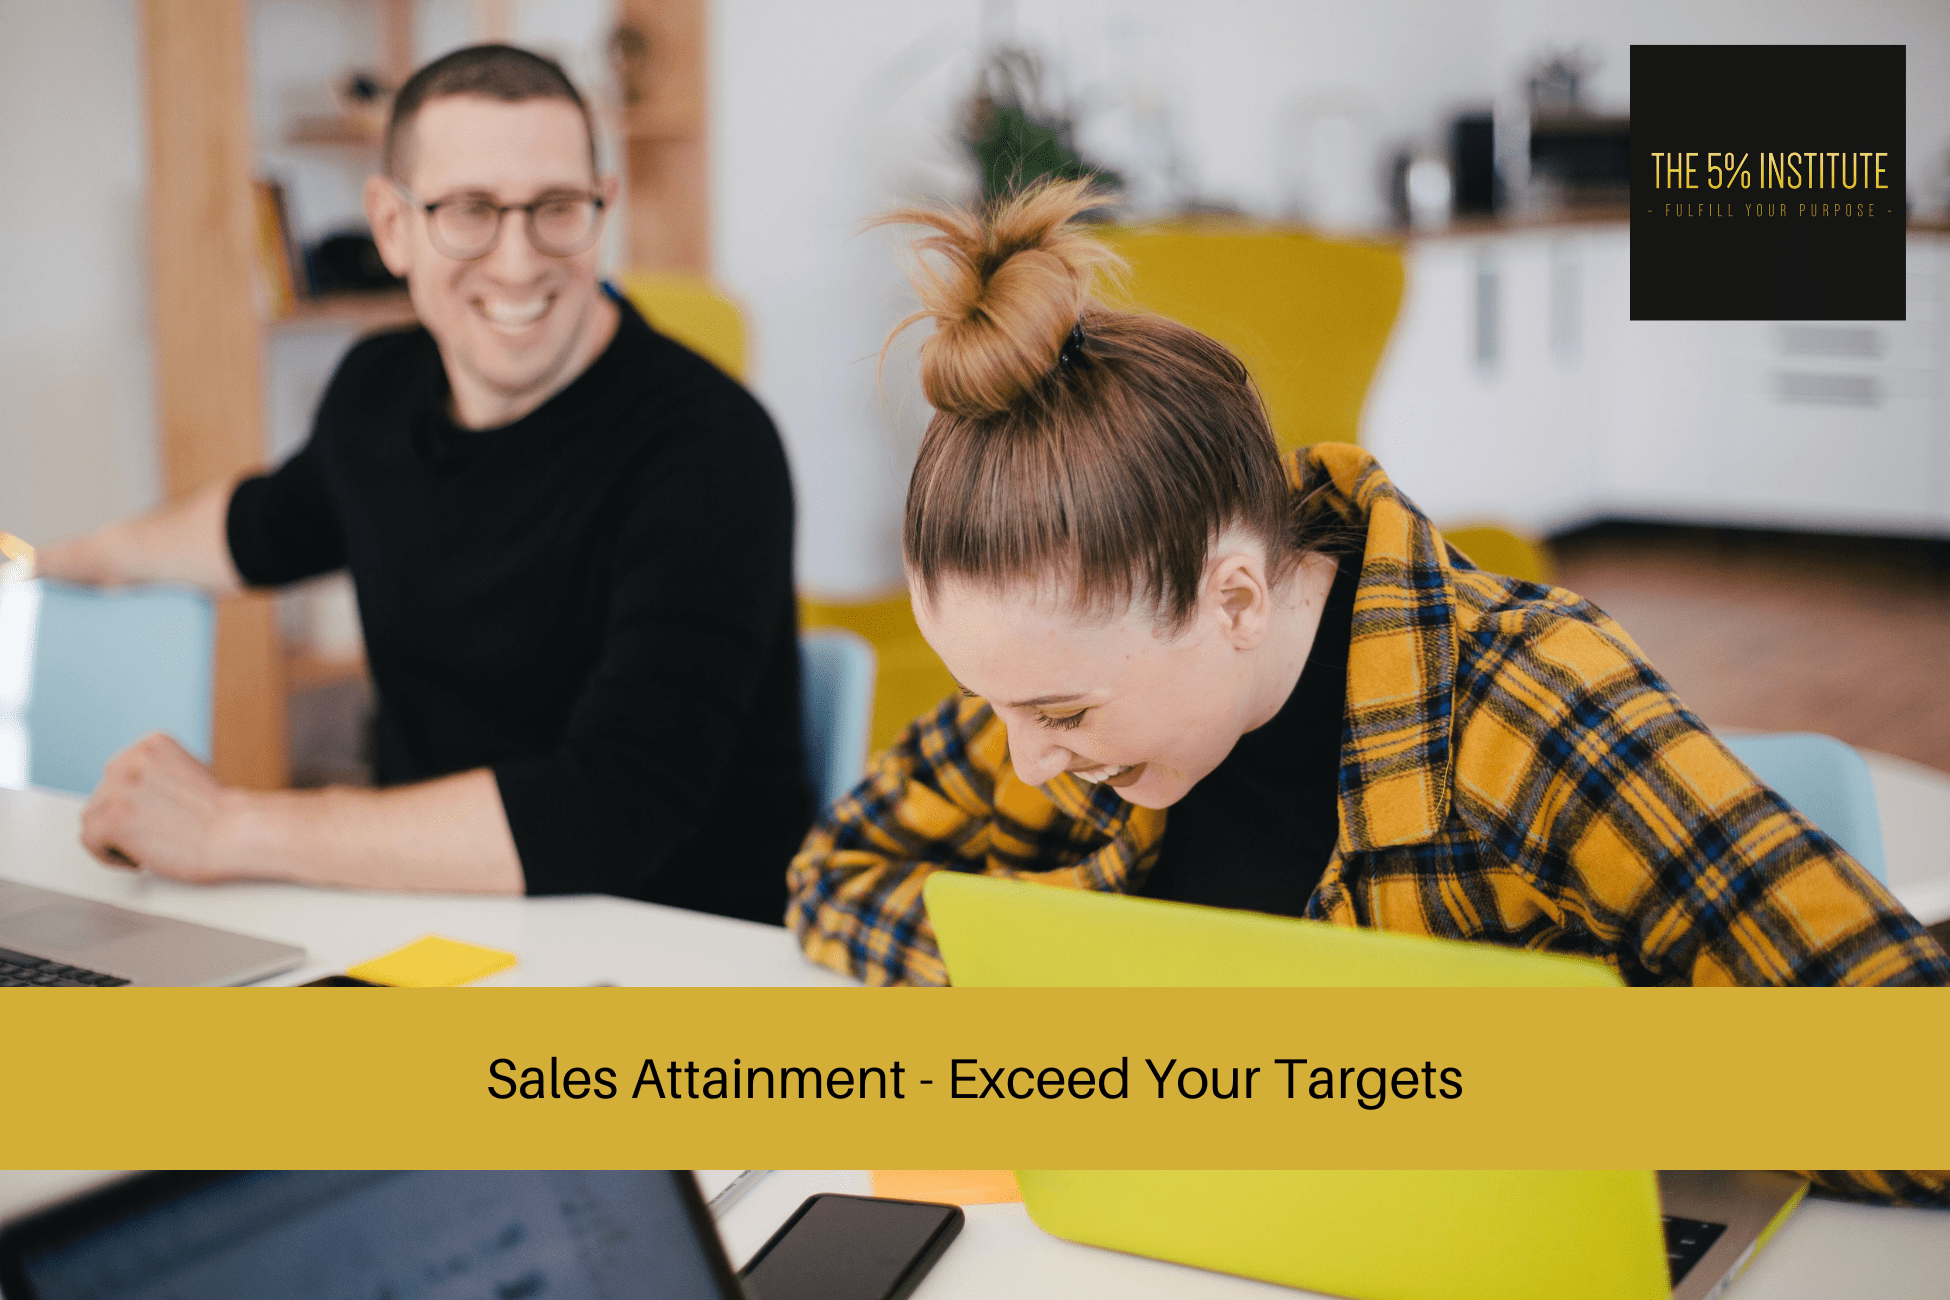 Sales Attainment - Exceed Your Targets